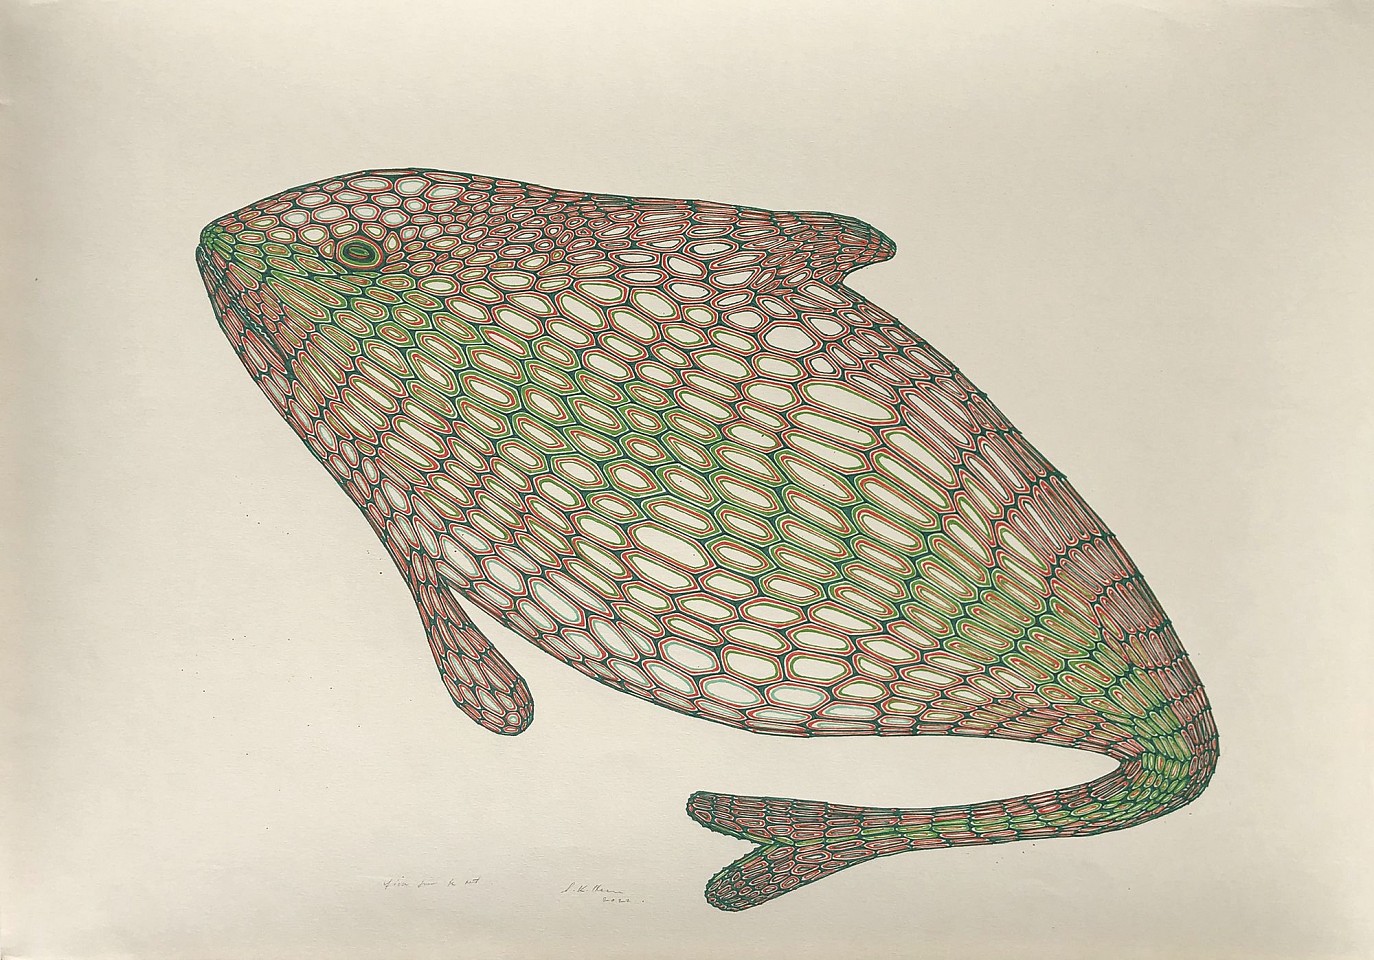 Stewart Helm, Fish From the Net, 2022
ink on paper, 17.75"x 25"
SH-643
Price Upon Request